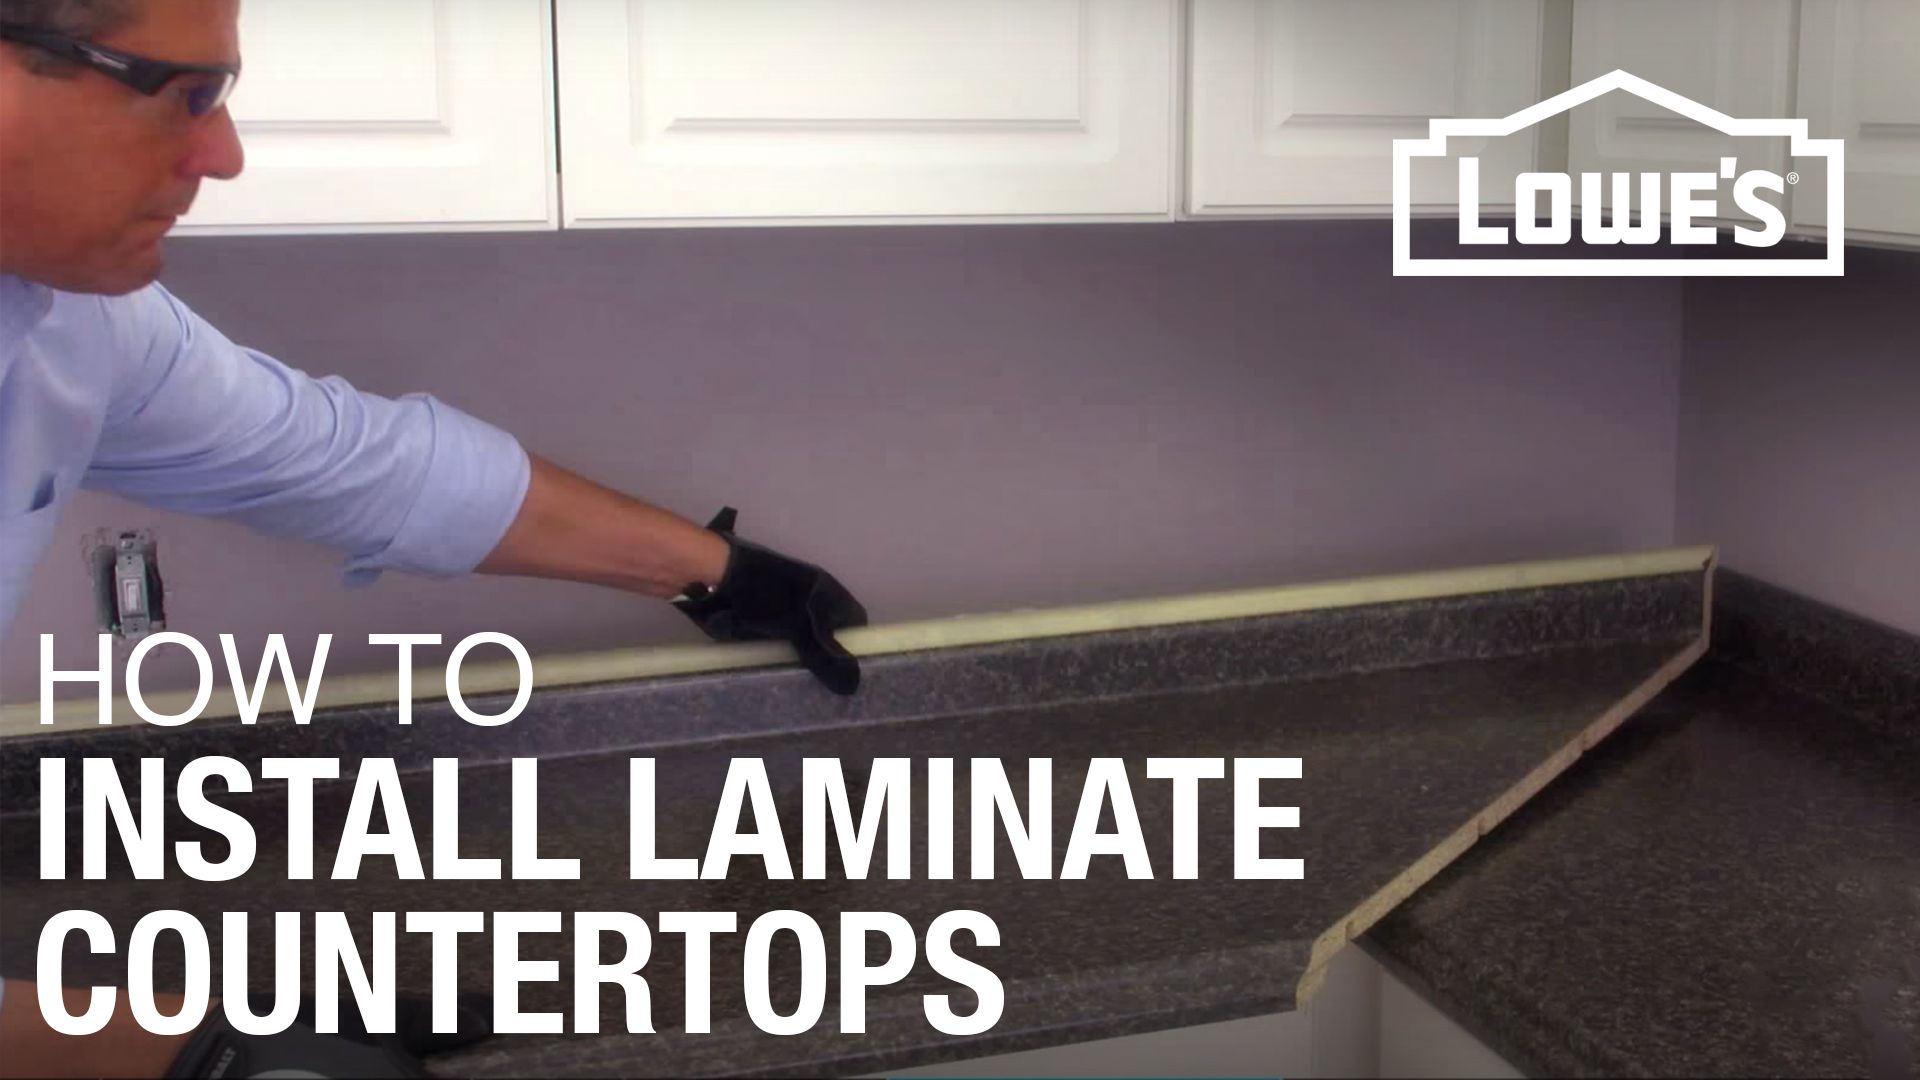 How To Install Laminate Countertops, How To Protect Laminate Countertop